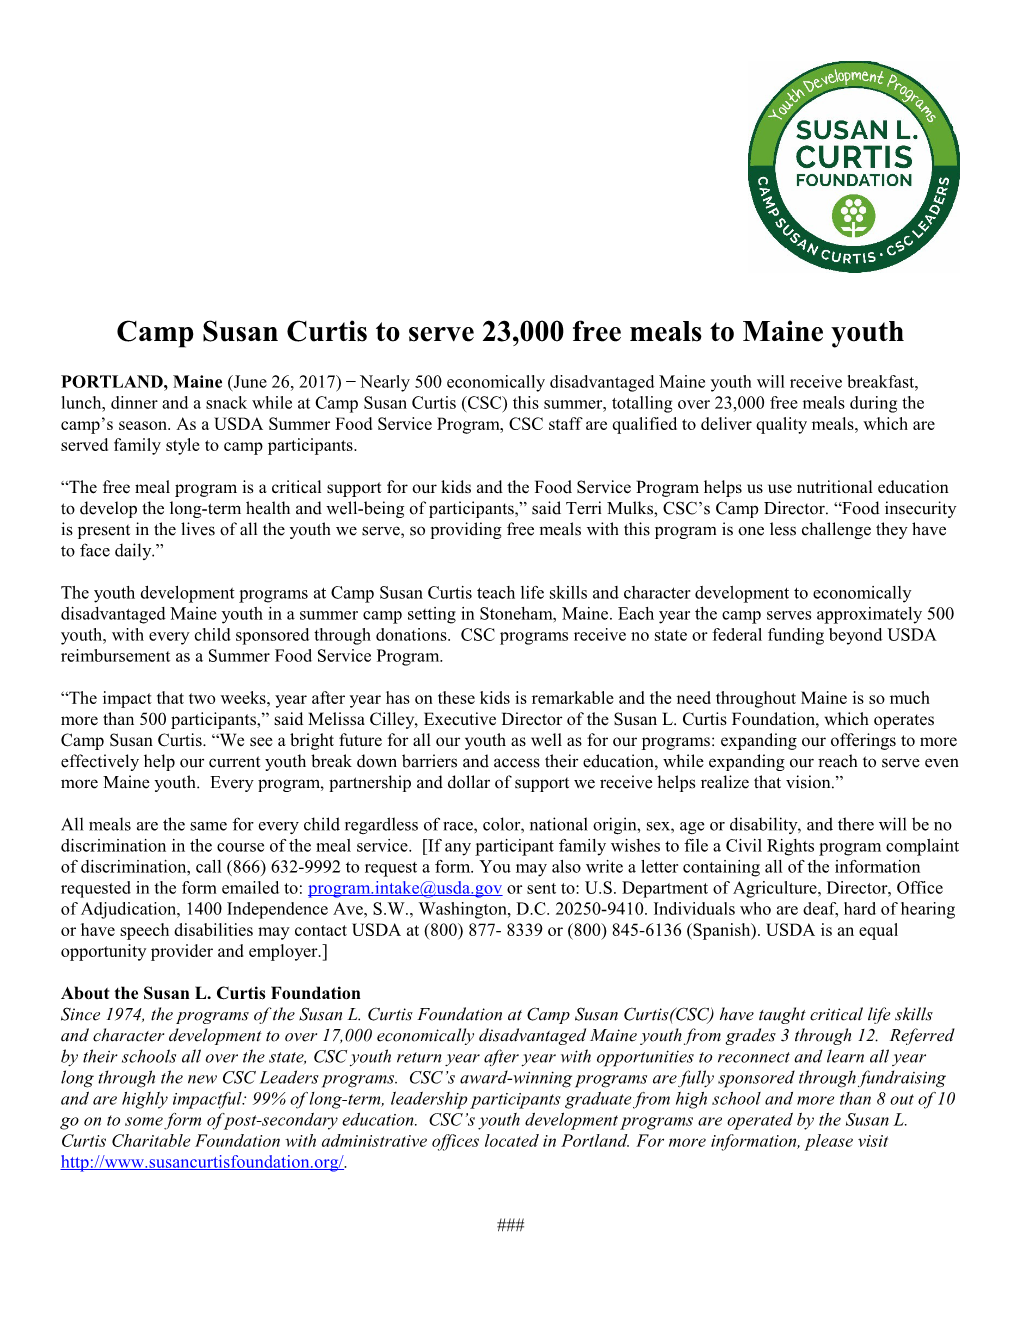 Camp Susan Curtis to Serve 23,000 Free Meals Tomaine Youth